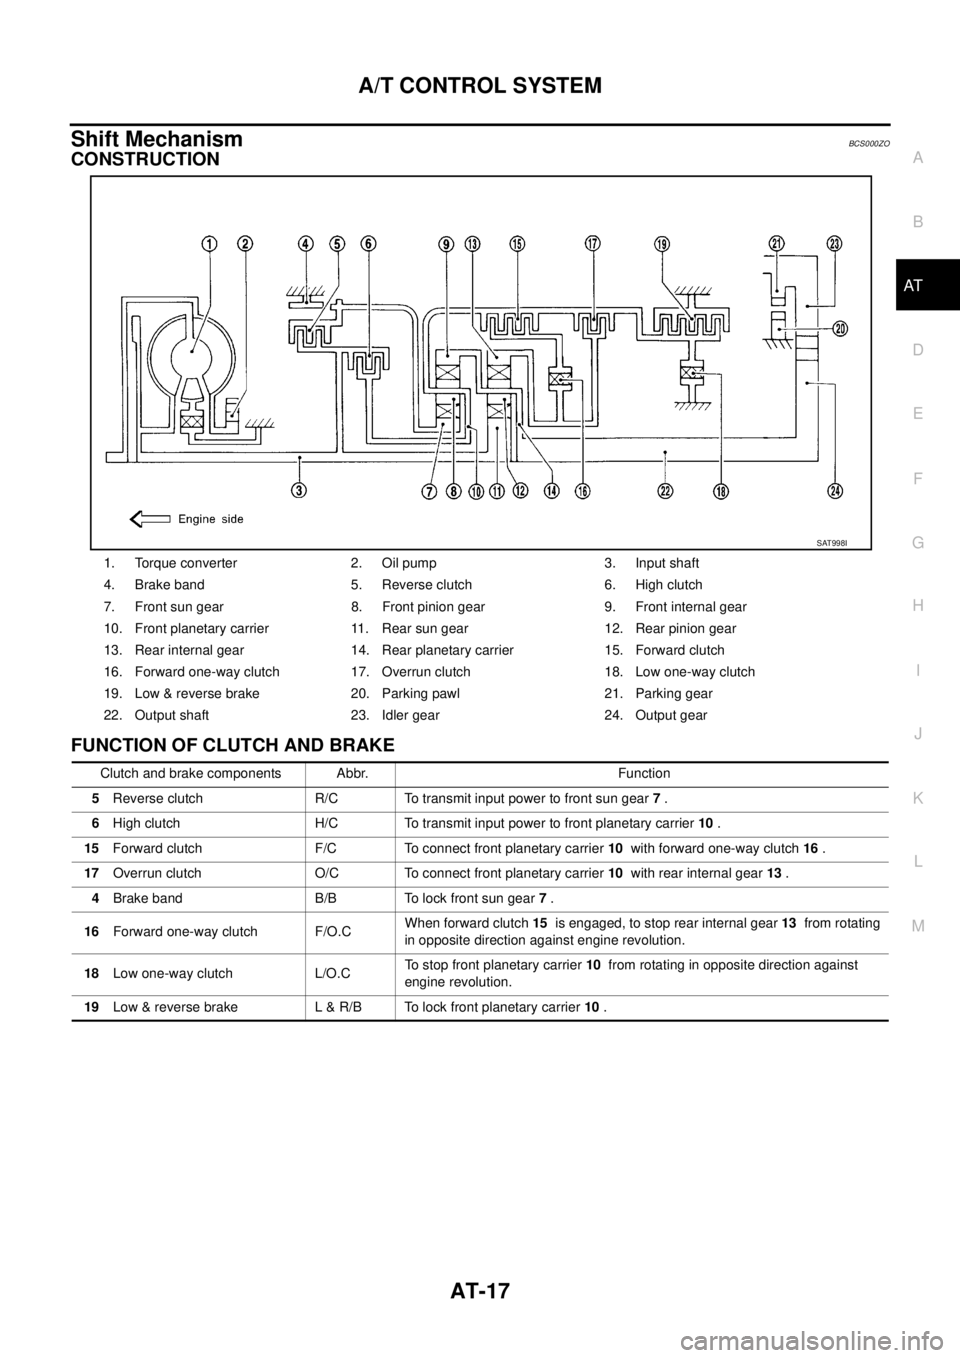 NISSAN TEANA 2003  Service Manual A/T CONTROL SYSTEM
AT-17
D
E
F
G
H
I
J
K
L
MA
B
AT
 
Shift MechanismBCS000ZO
CONSTRUCTION
FUNCTION OF CLUTCH AND BRAKE
1. Torque converter 2. Oil pump 3. Input shaft
4. Brake band 5. Reverse clutch 6.